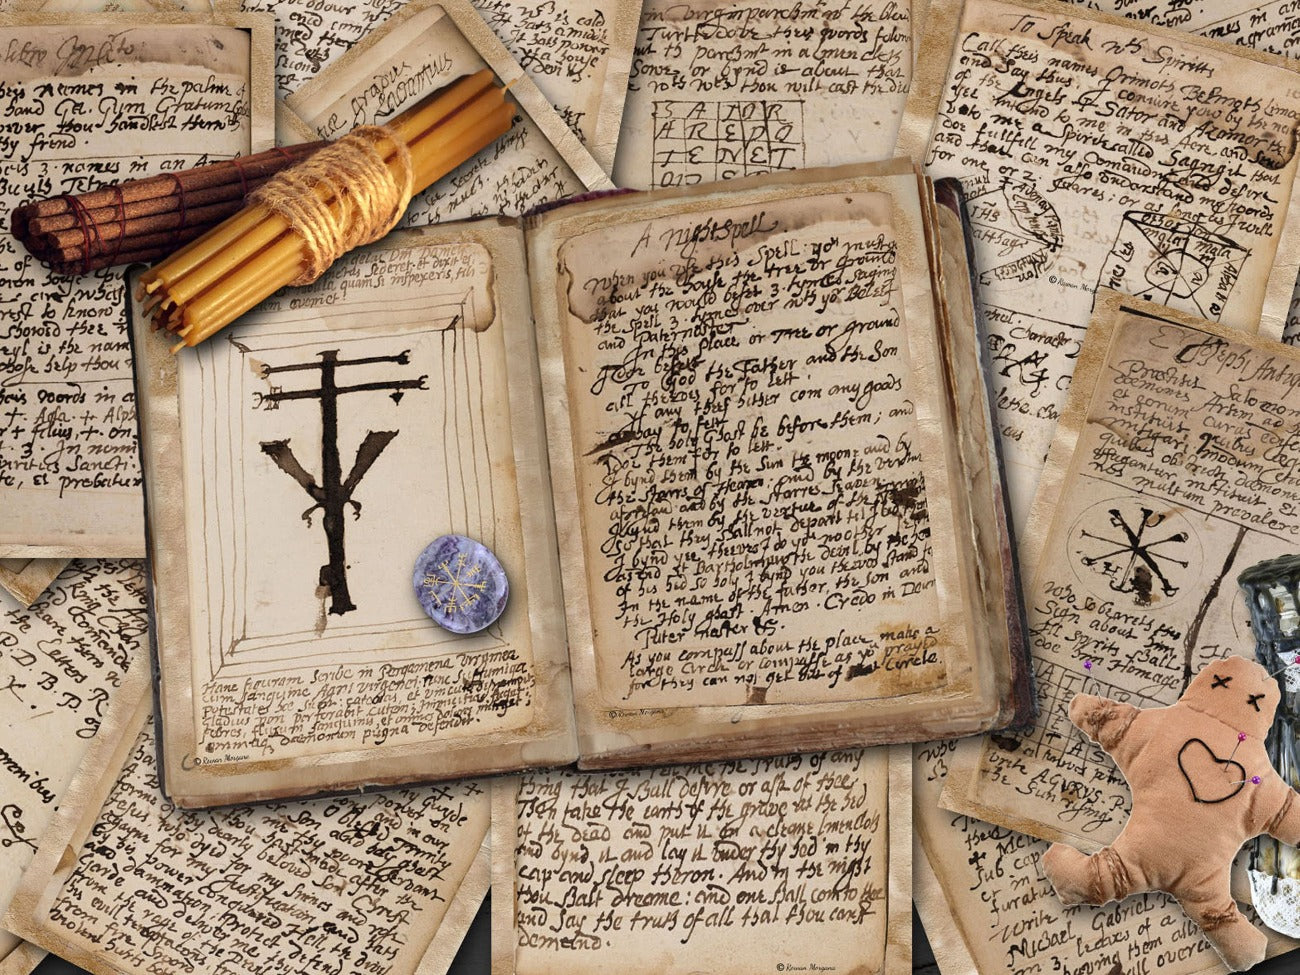 ANCIENT SPELLS 25 pages shown with two pages in an open witch book and the rest of the pages scattered underneath it. Pages are old parchment with handwritten spells- Morgana Magick Spell